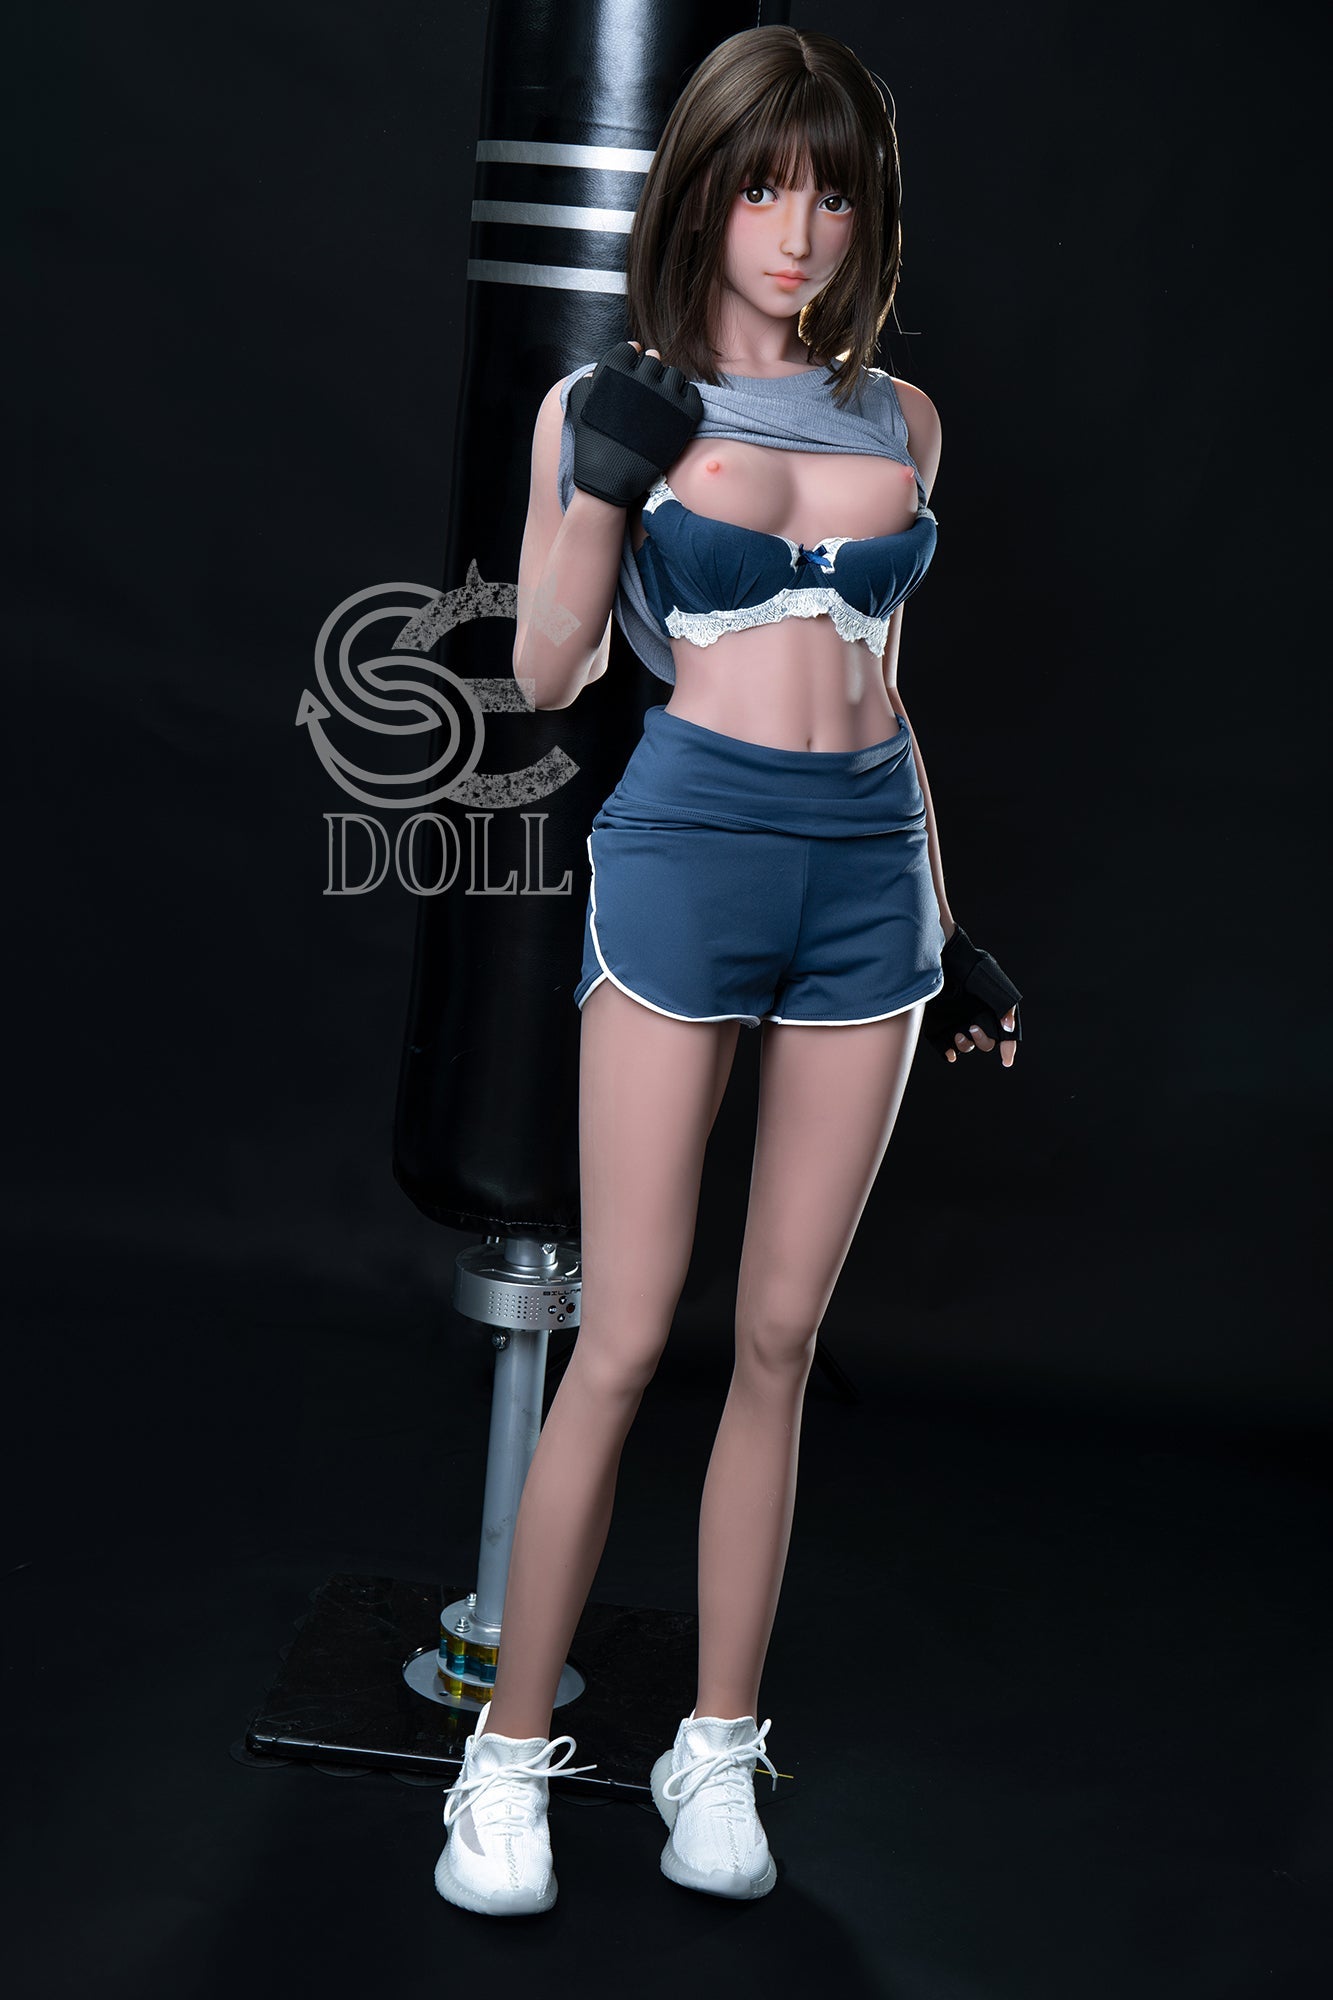 SE Doll - 166 cm C Cup TPE Doll - Hirono (5ft 5in) - Love Dolls 4U